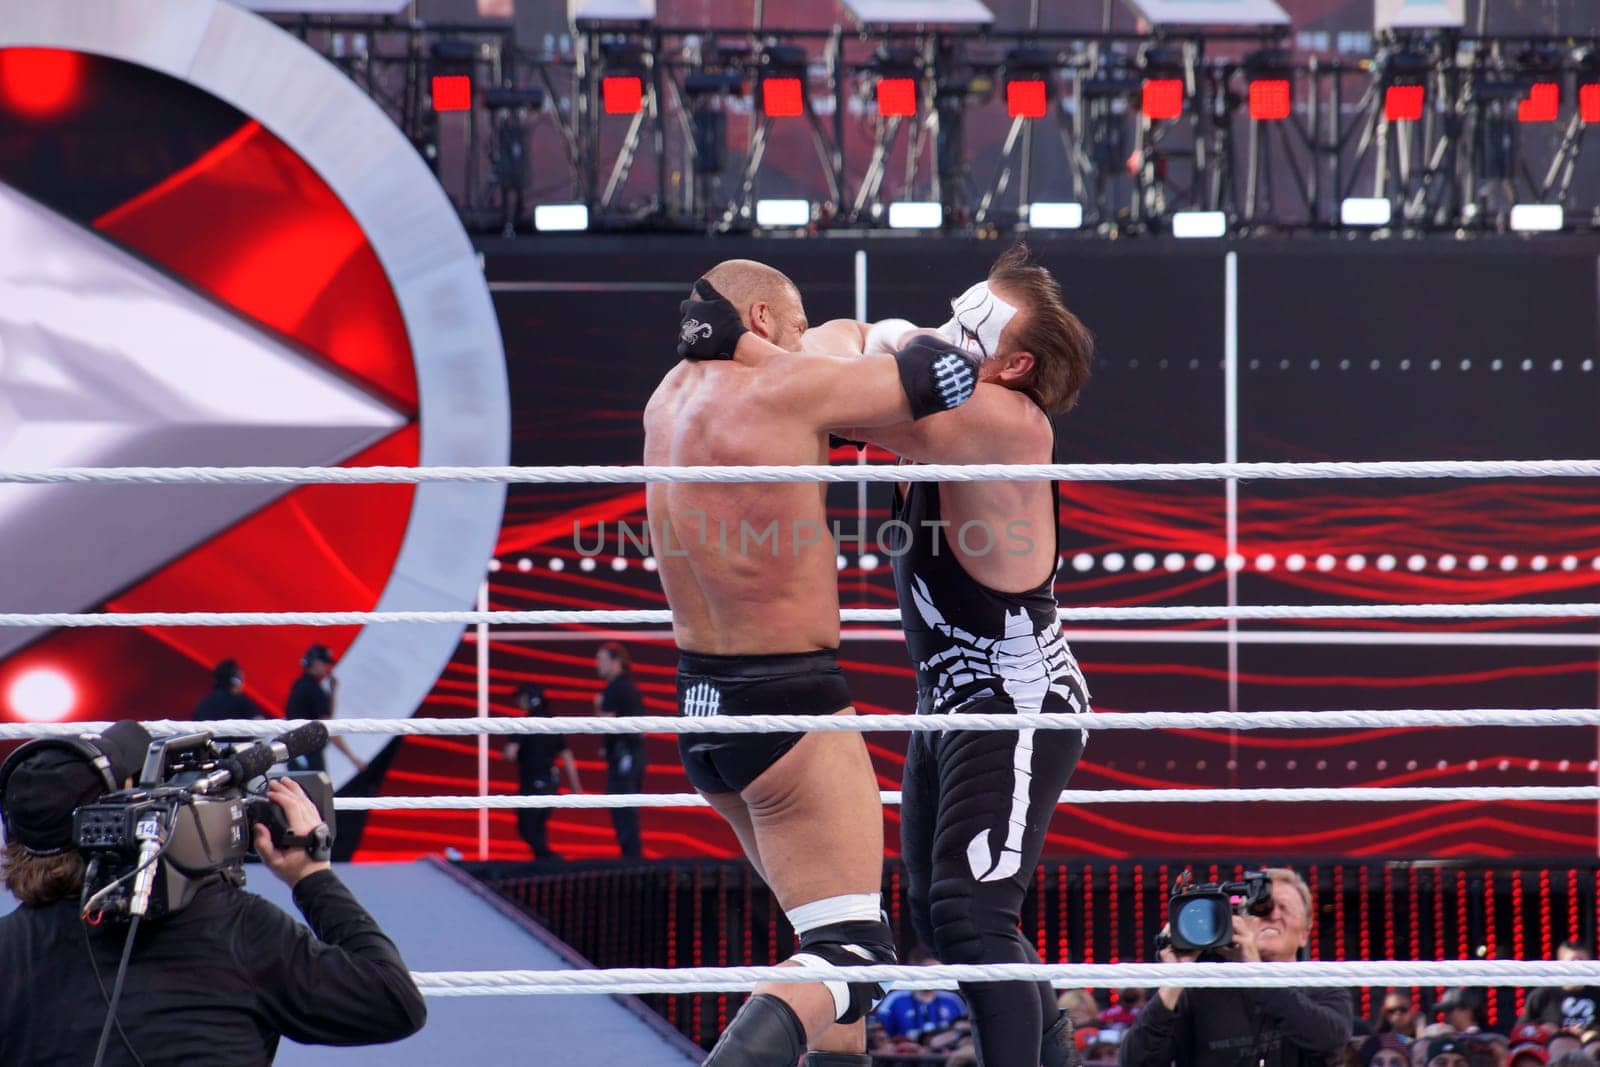 Santa Clara, California - March 29, 2015:  At Wrestlemania 31, at Levi's Stadium, Triple H and Sting engaged in a lock-up during their match in the ring.